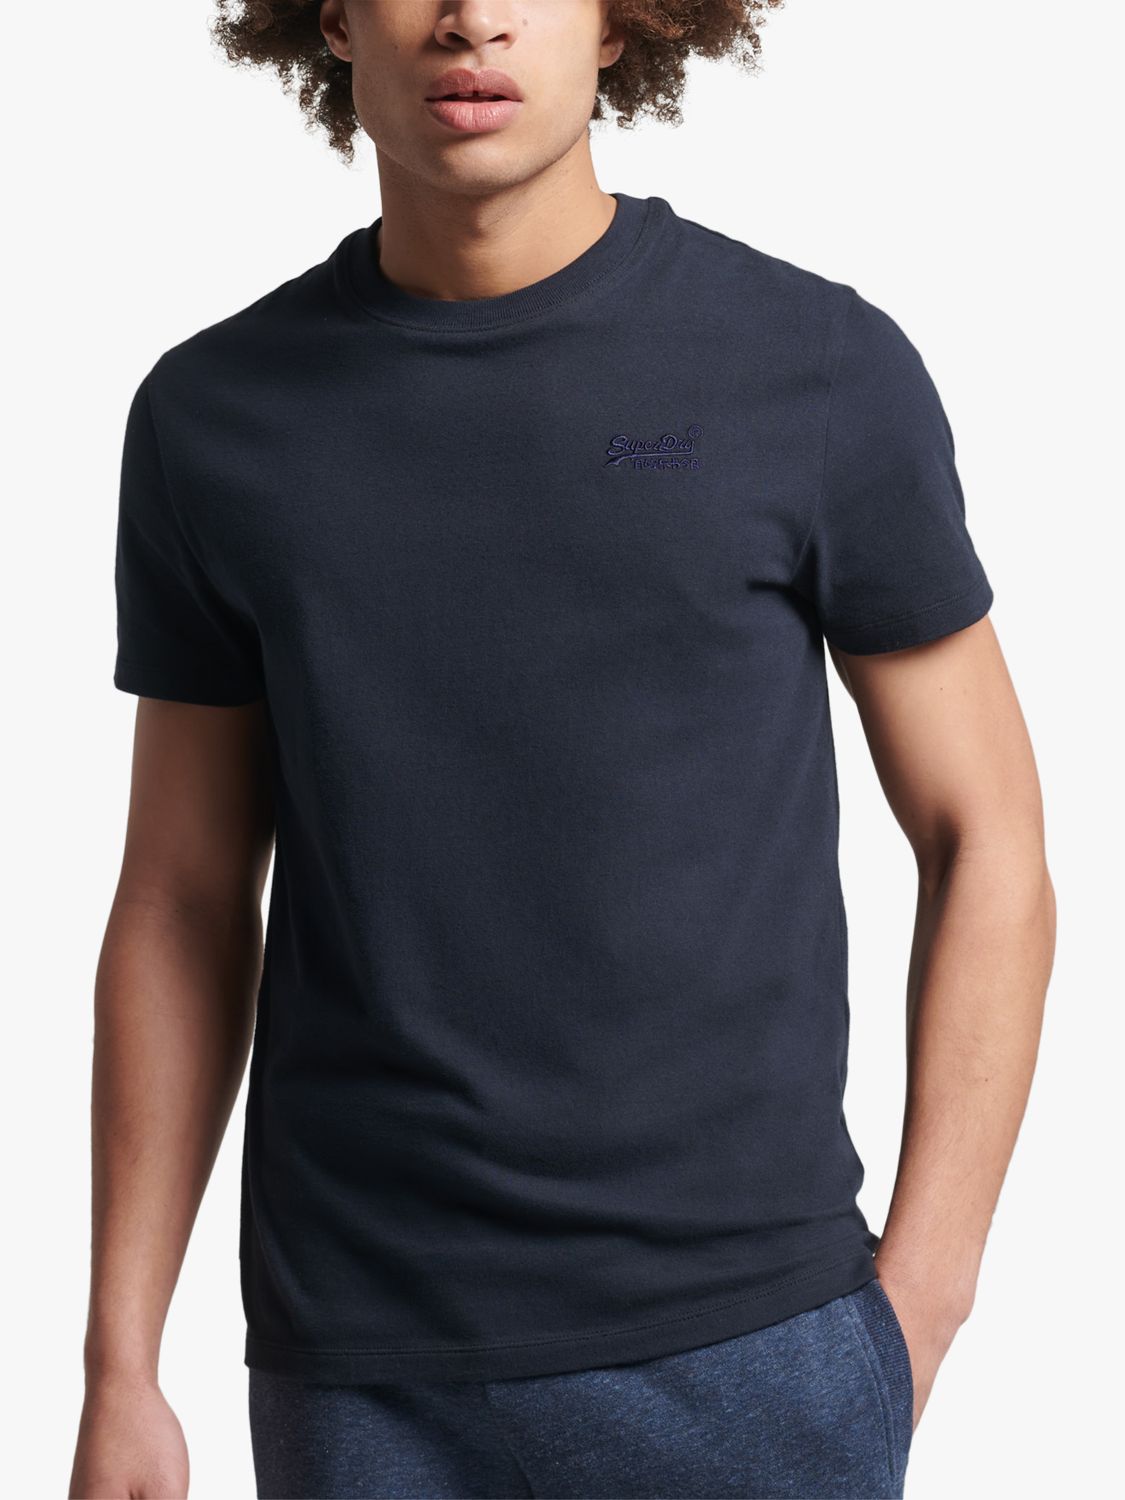 Superdry Organic Cotton Vintage Lewis Logo John Navy T-Shirt, & Eclipse Partners at Embroidered